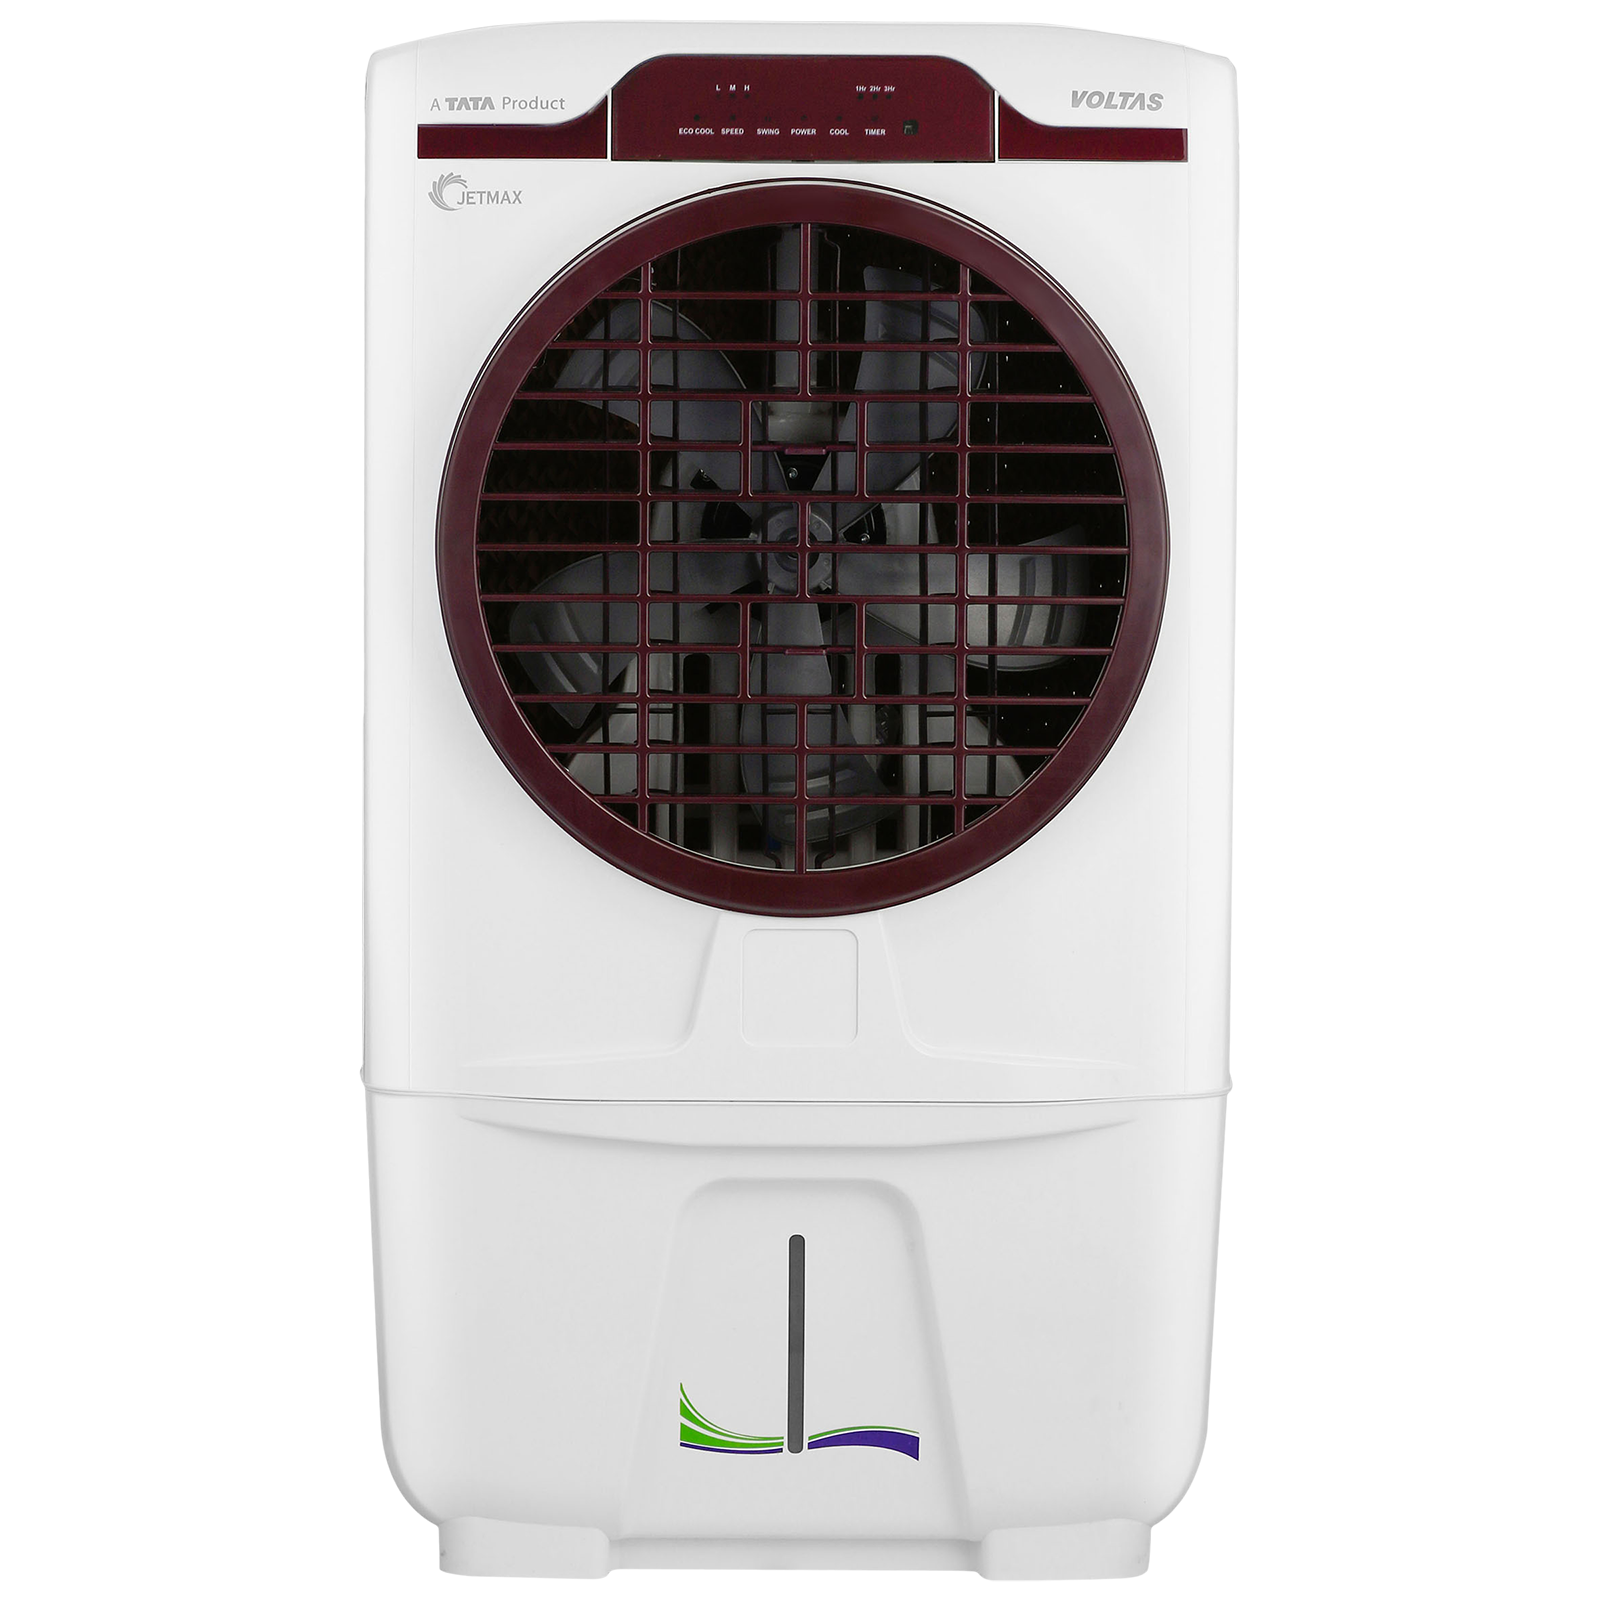 VOLTAS JetMax T 70 Litres Desert Air Cooler with Turbo Air Throw (Smart Humidity Control, White & Burgundy)